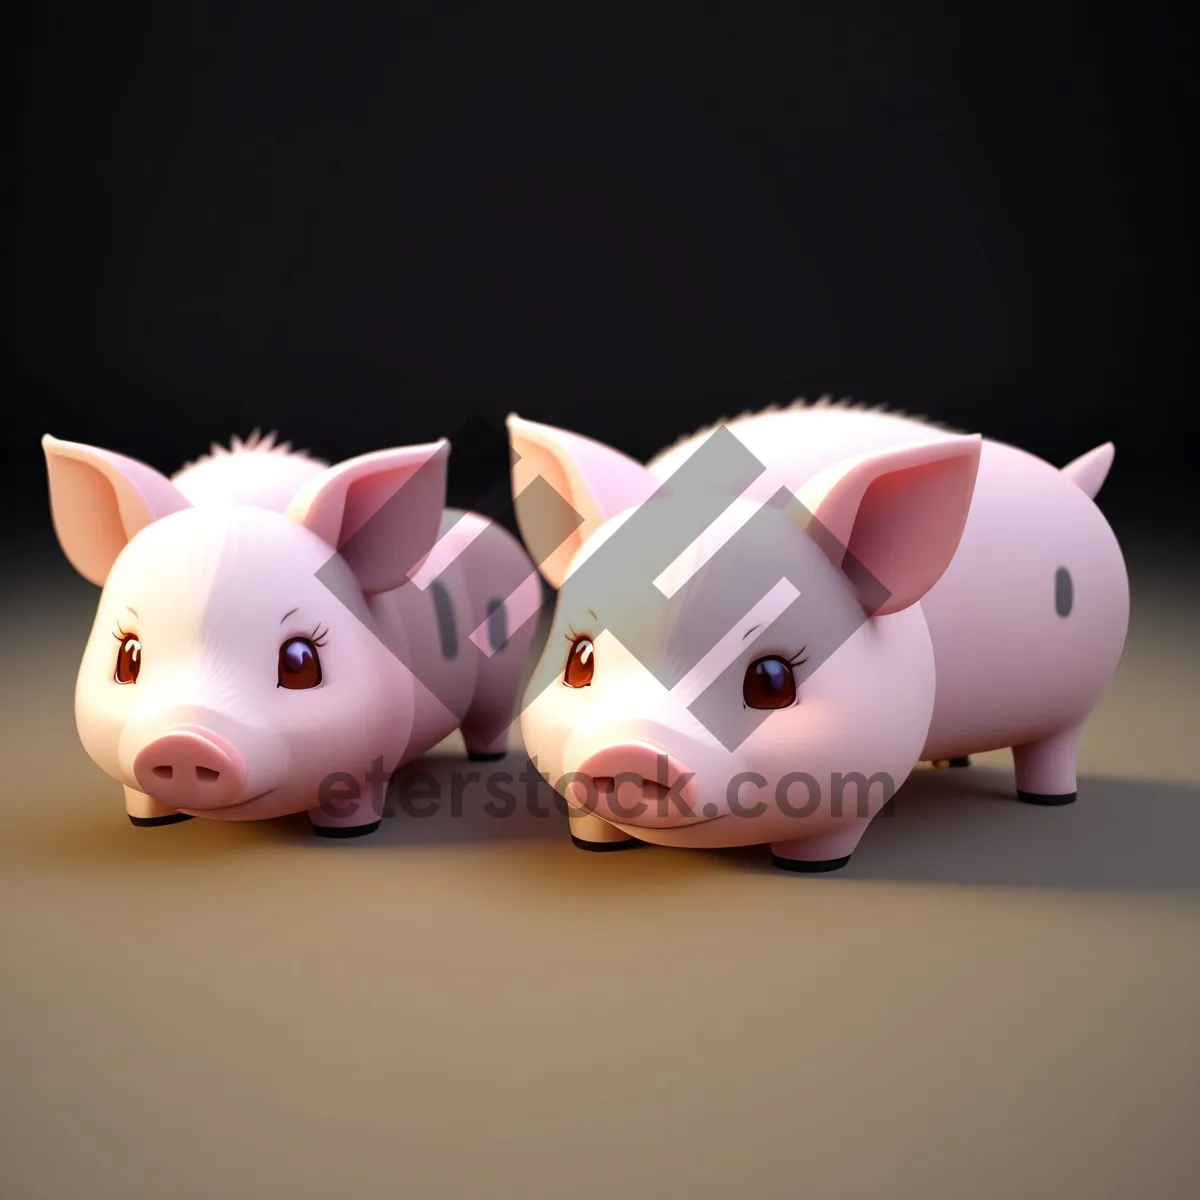 Picture of Pink Ceramic Piggy Bank for Saving Money